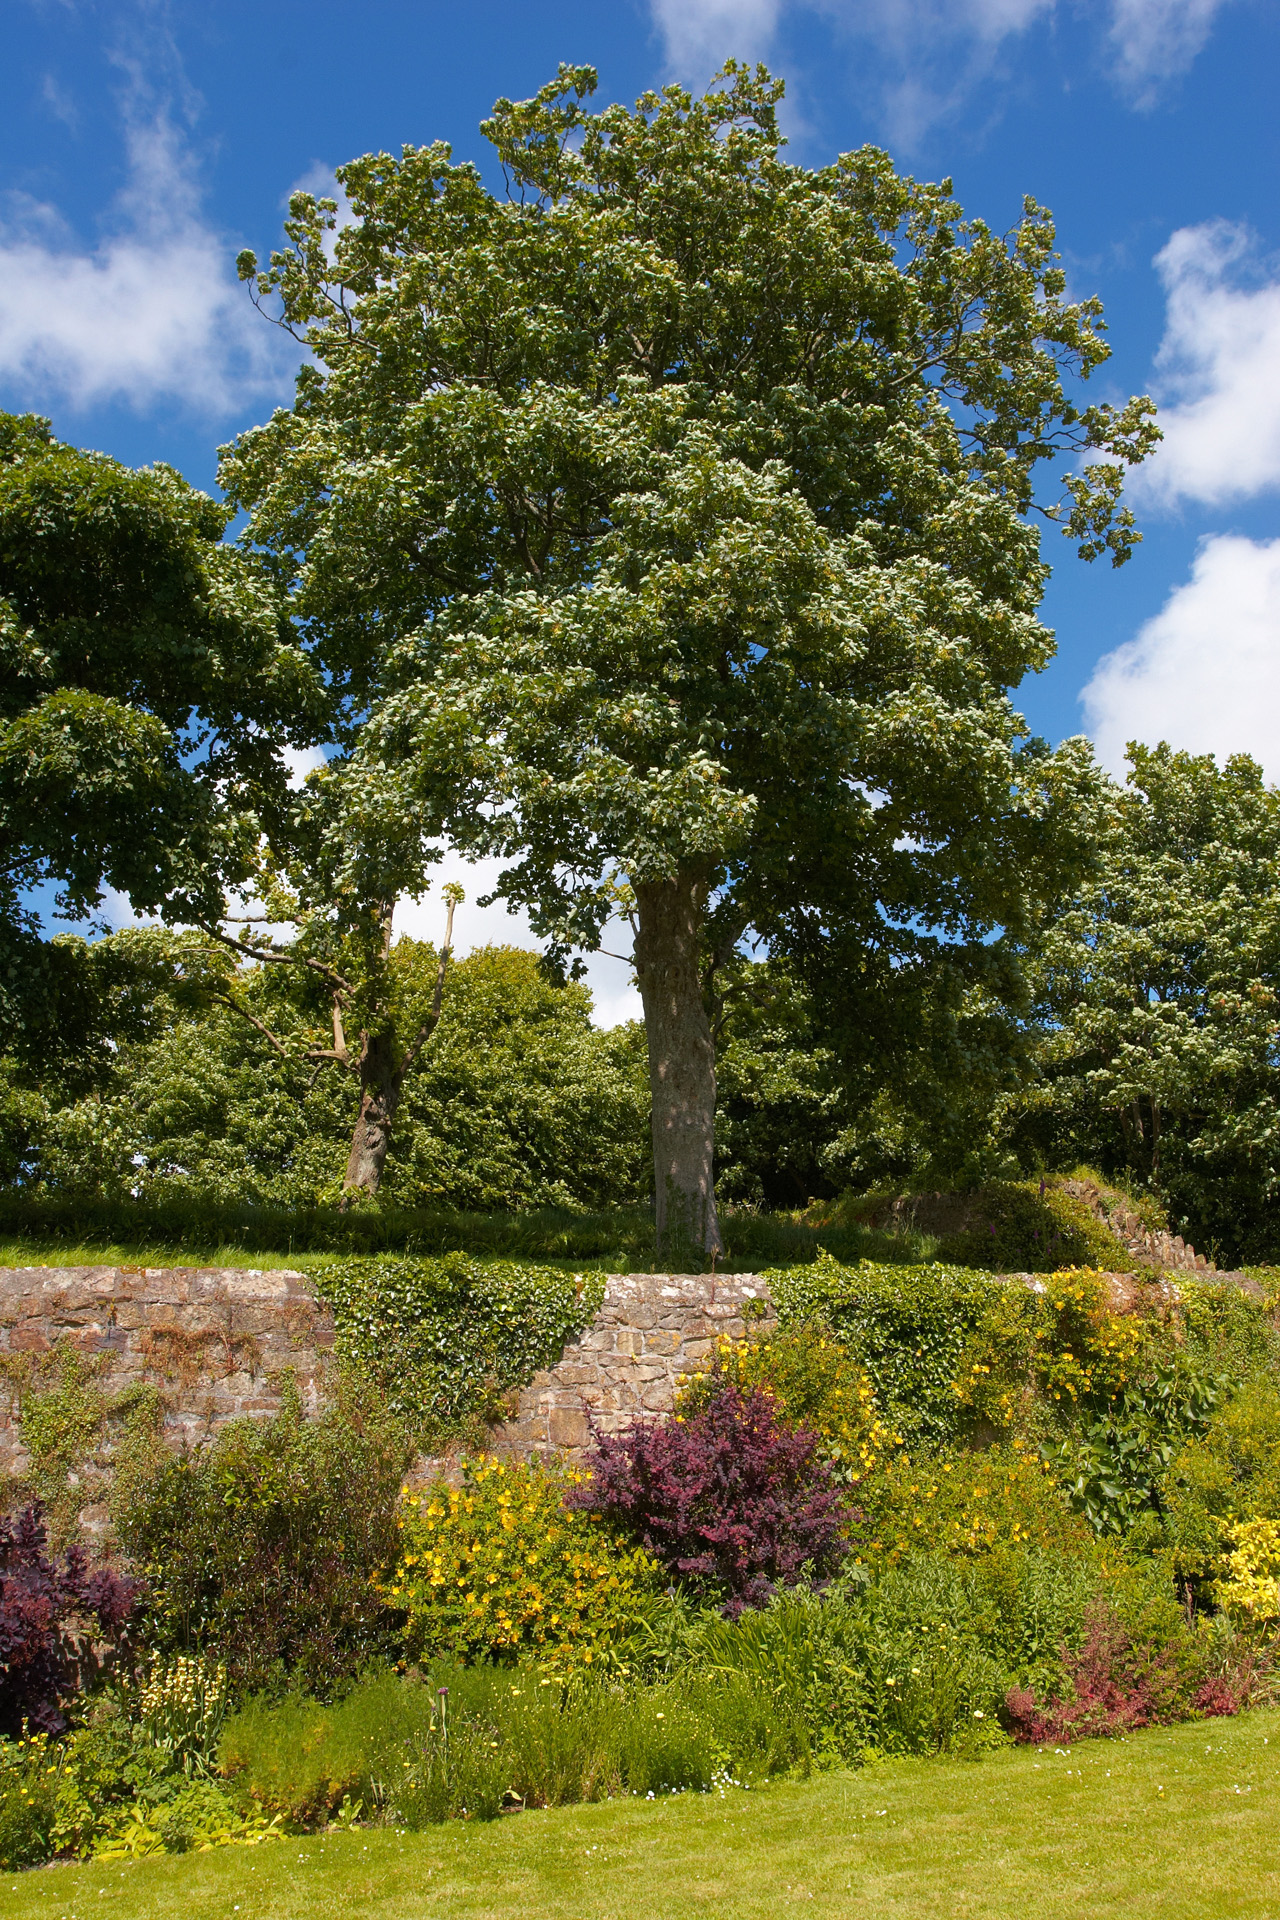 The gardens at Trerice House, Cornwall